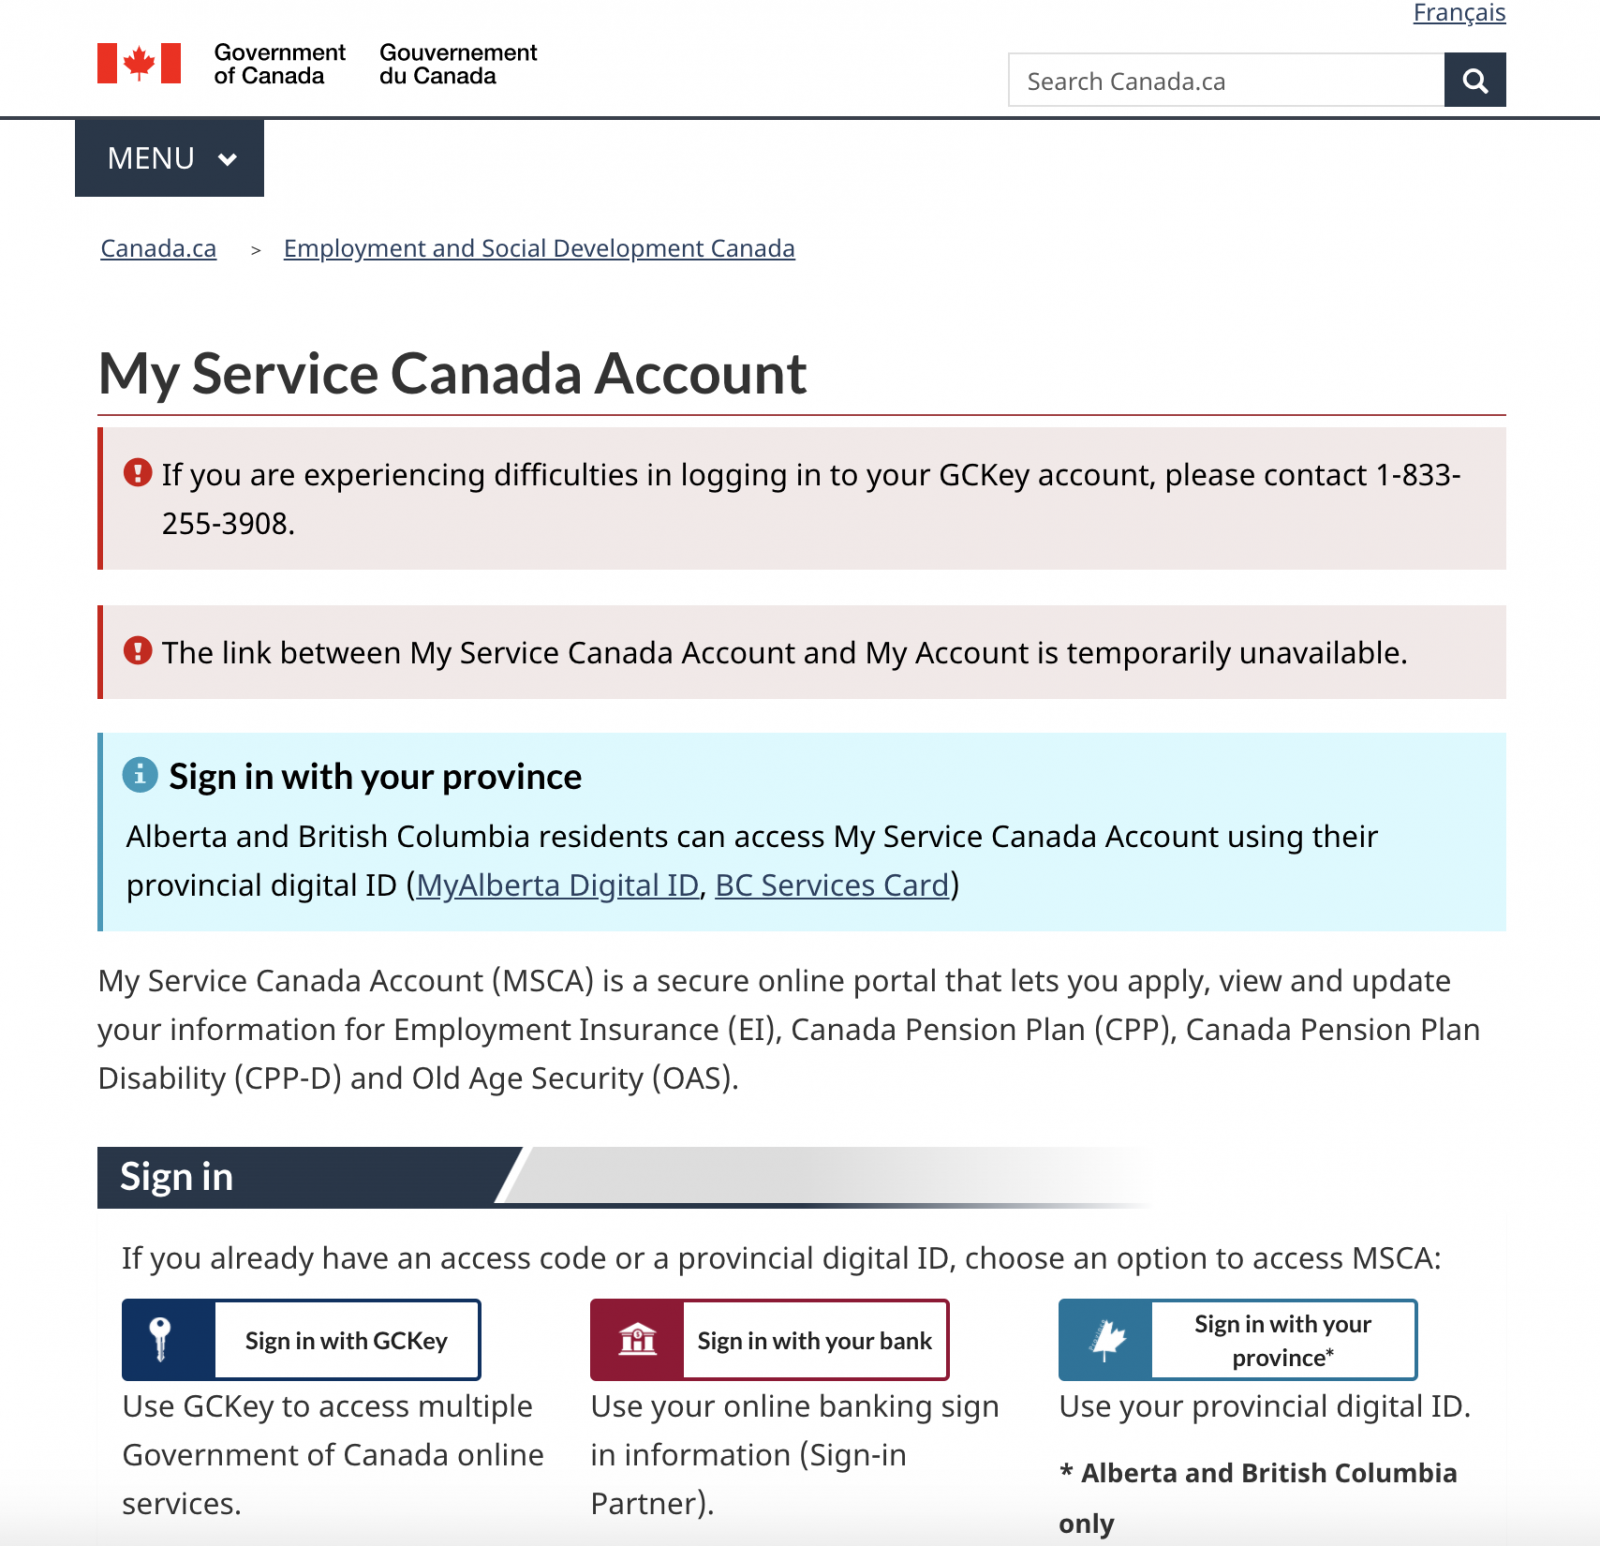 Canadian government services allowing multiple sign-in routes